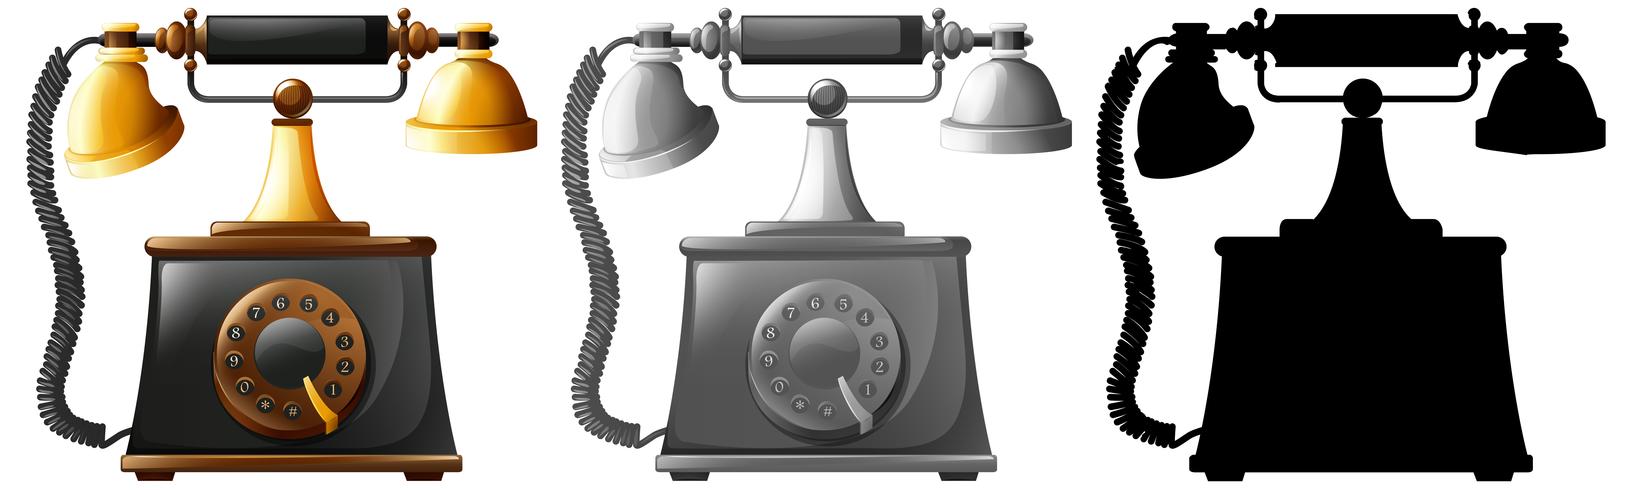 Set of old fashioned telephones vector